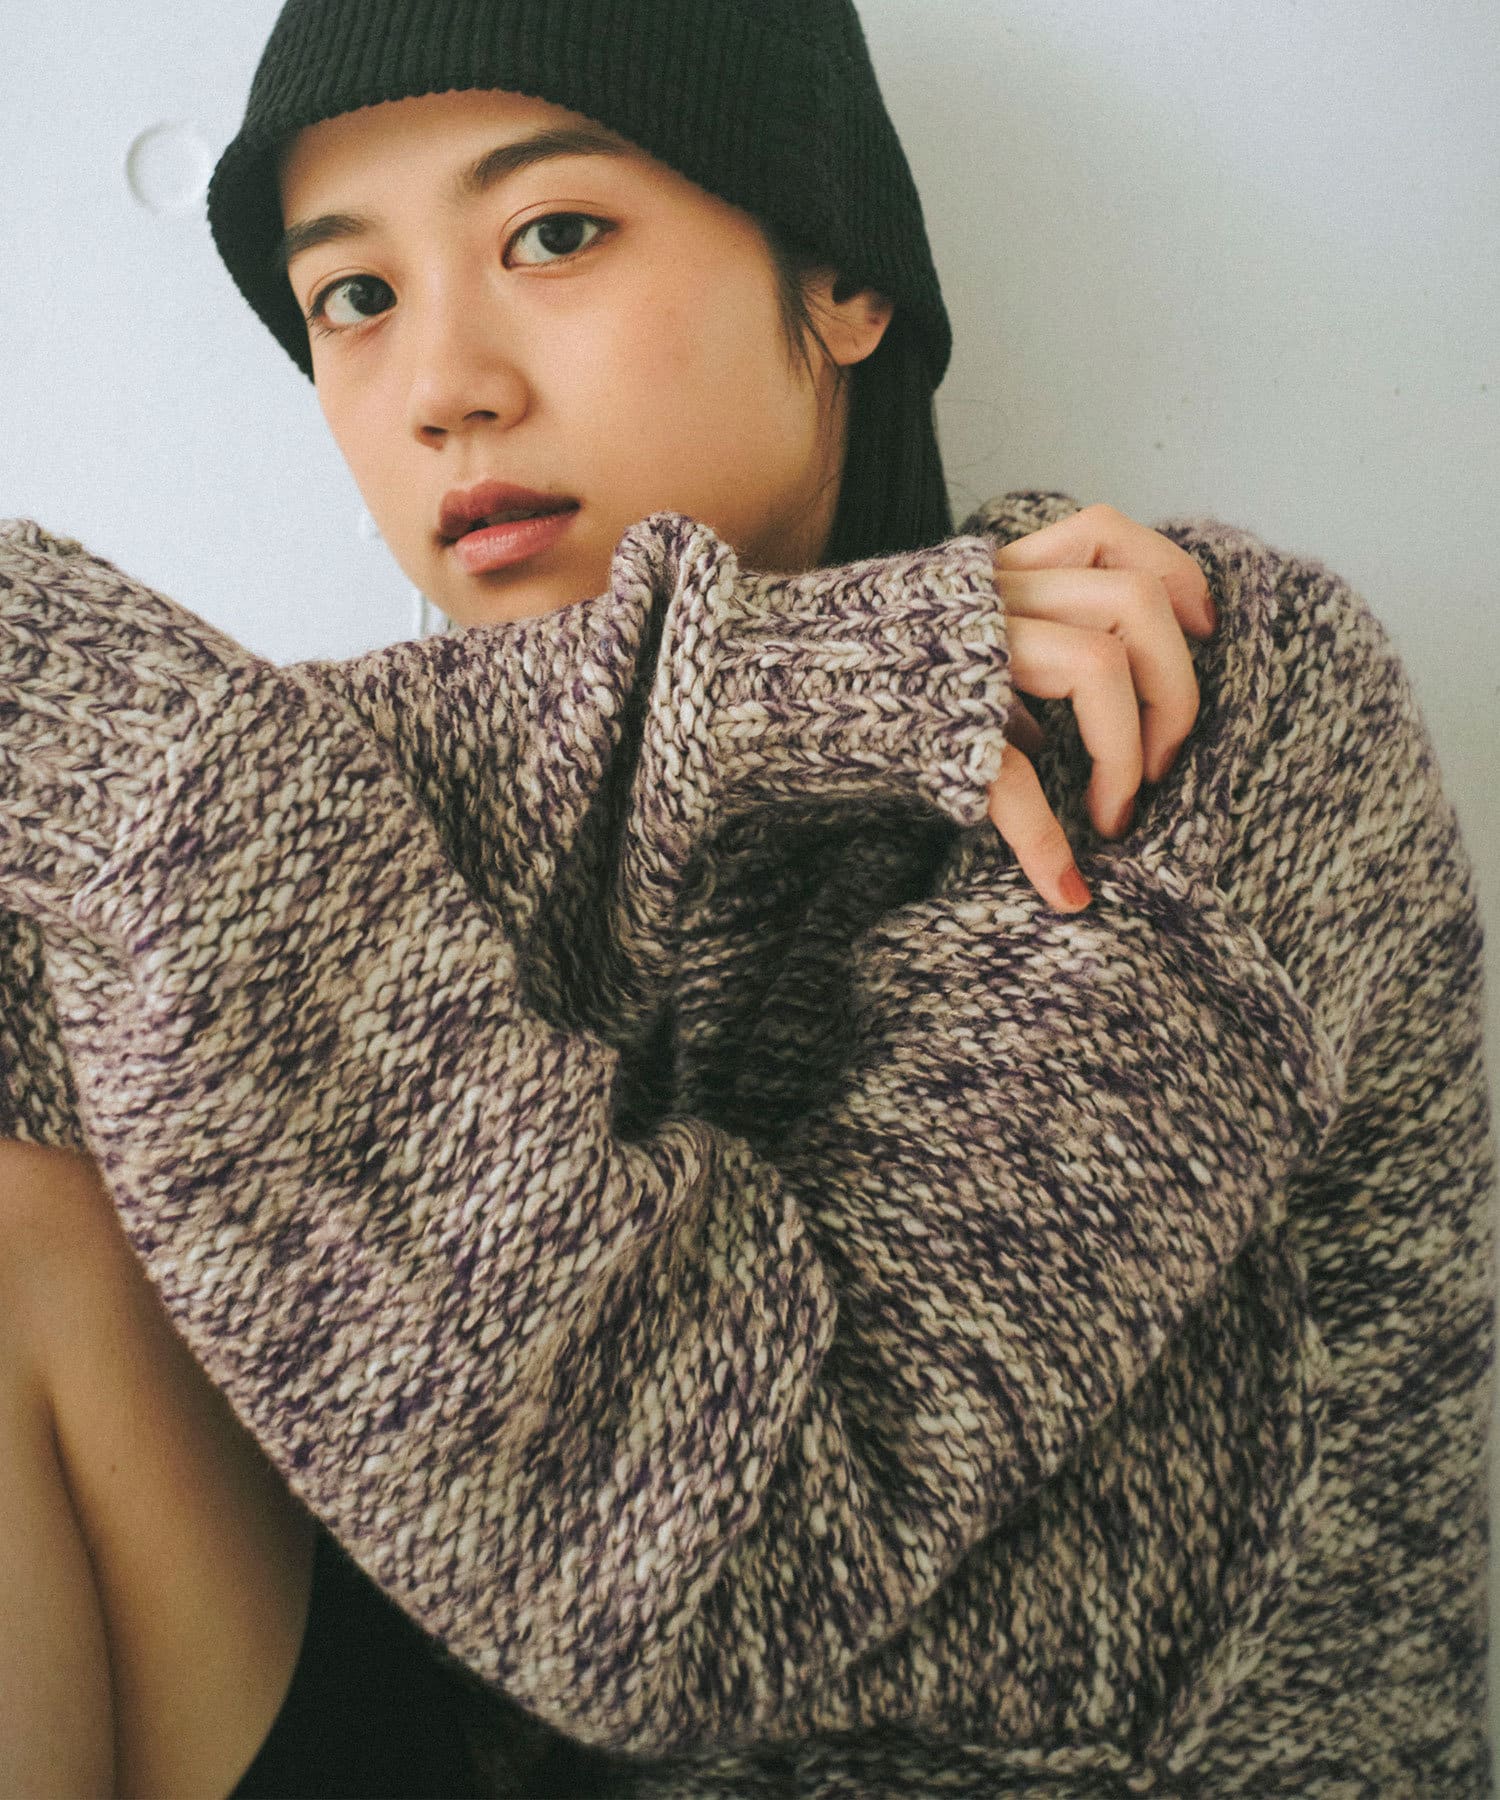 Kastane(カスタネ) 【WHIMSIC】OUT LINKING MIX KNIT PULL-OVER